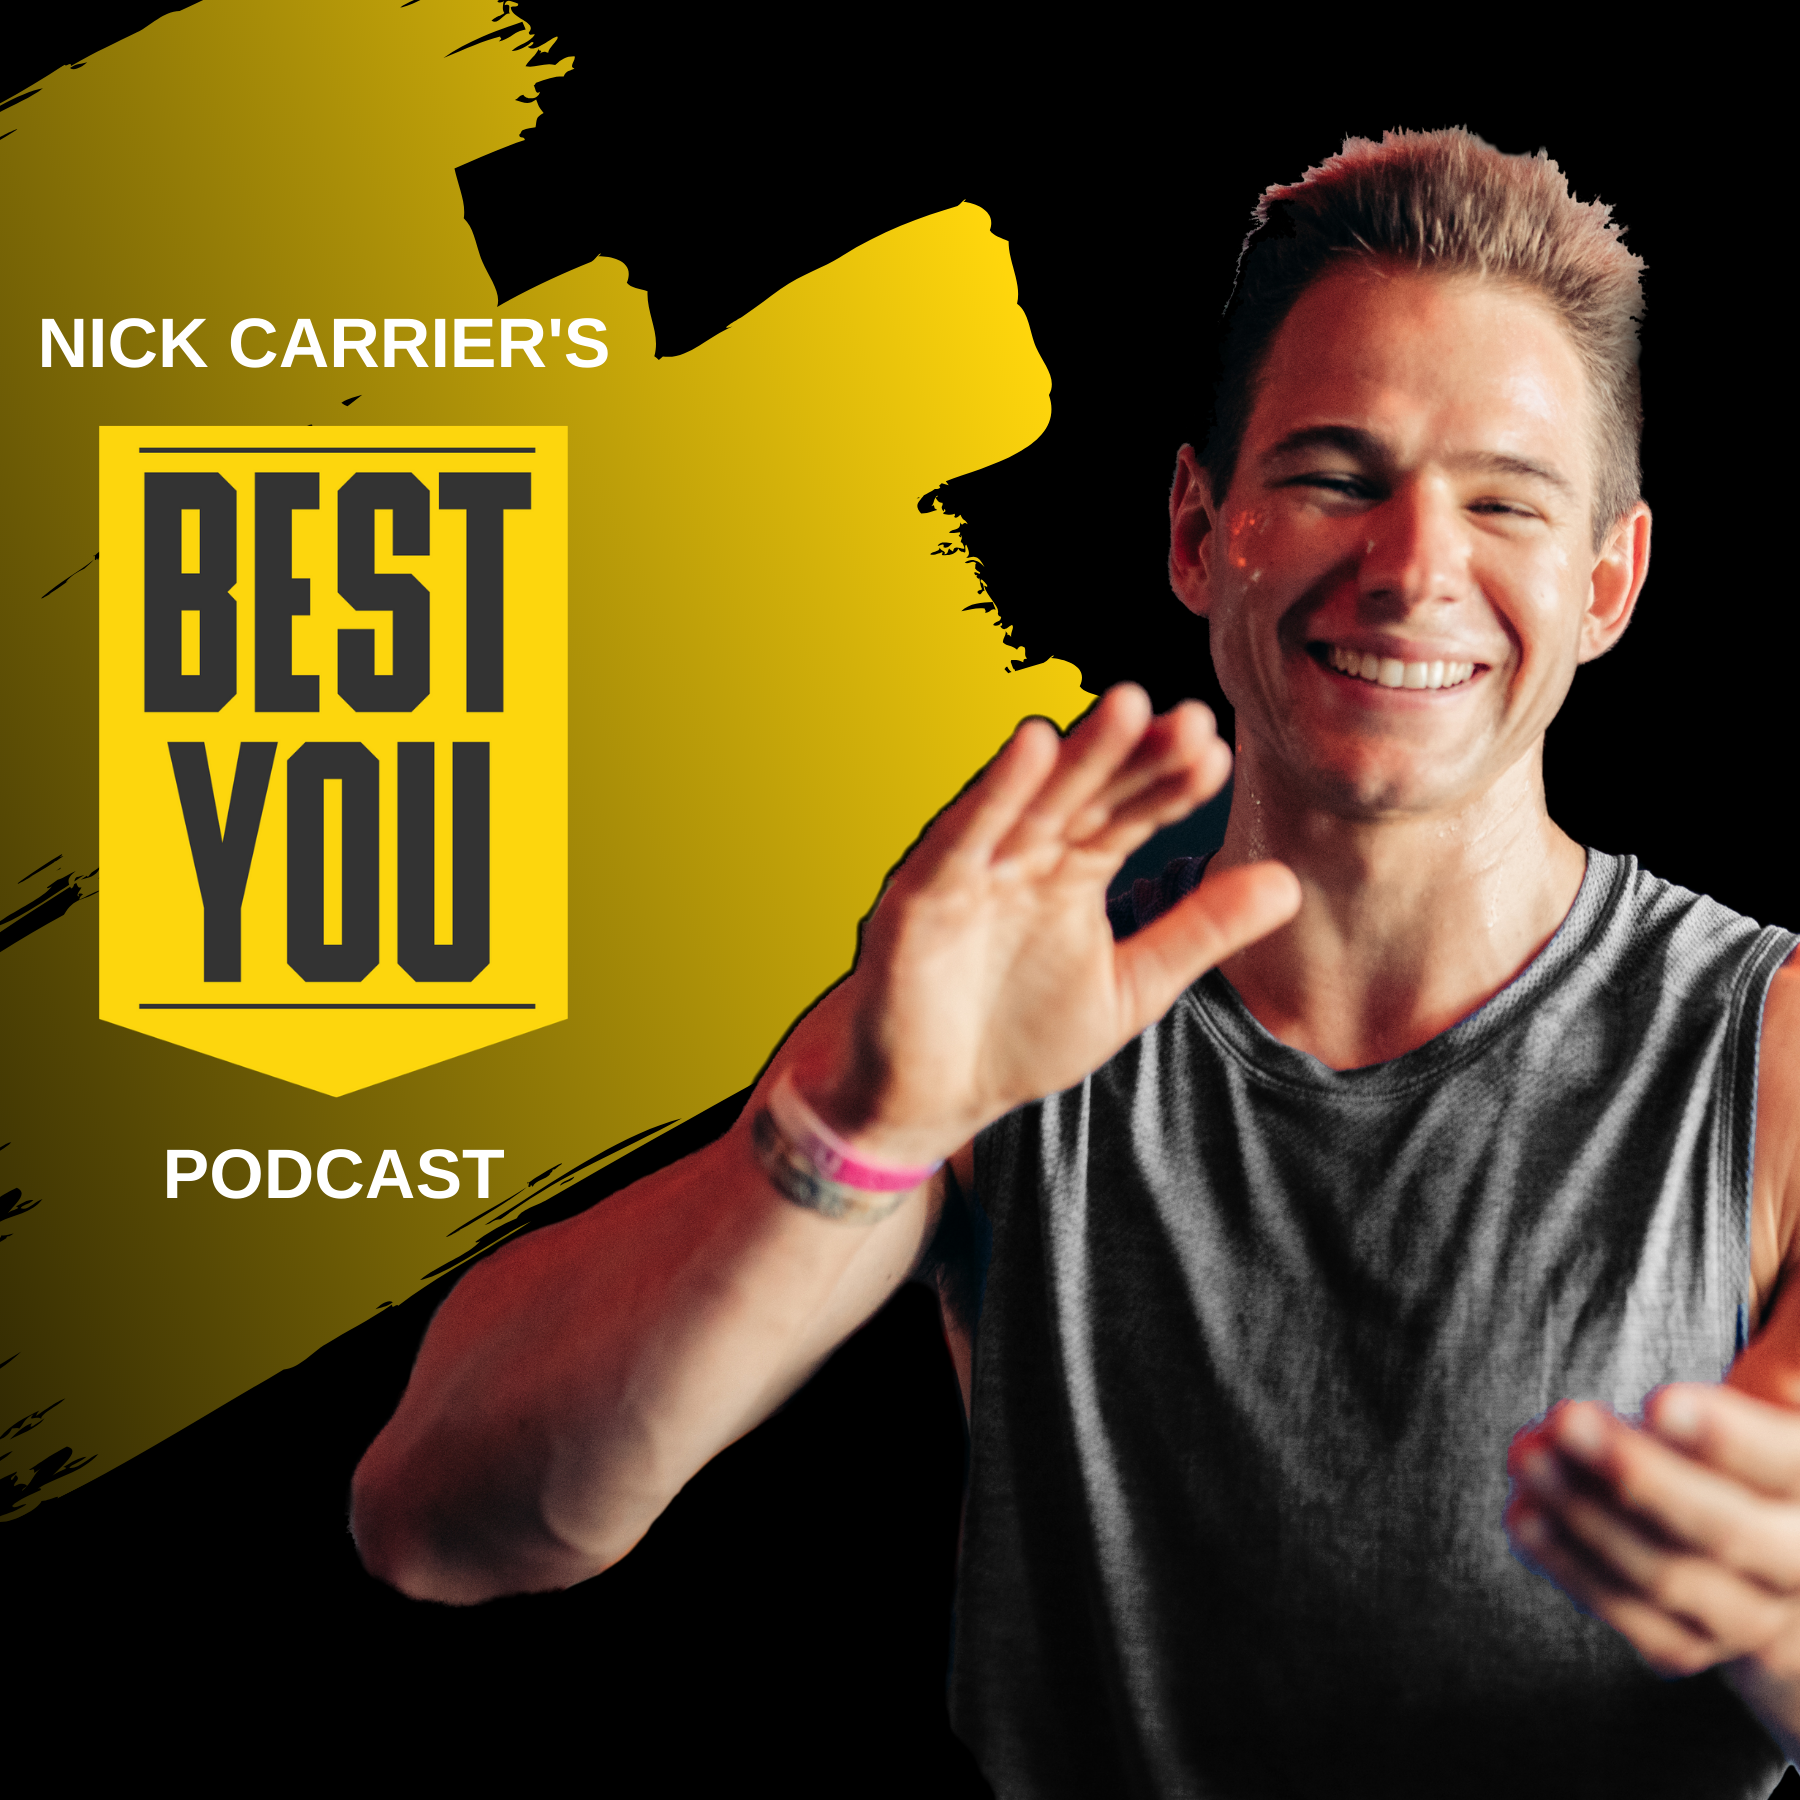 208. Nick's 3 Takeaways - You MUST Evaluate your Wins